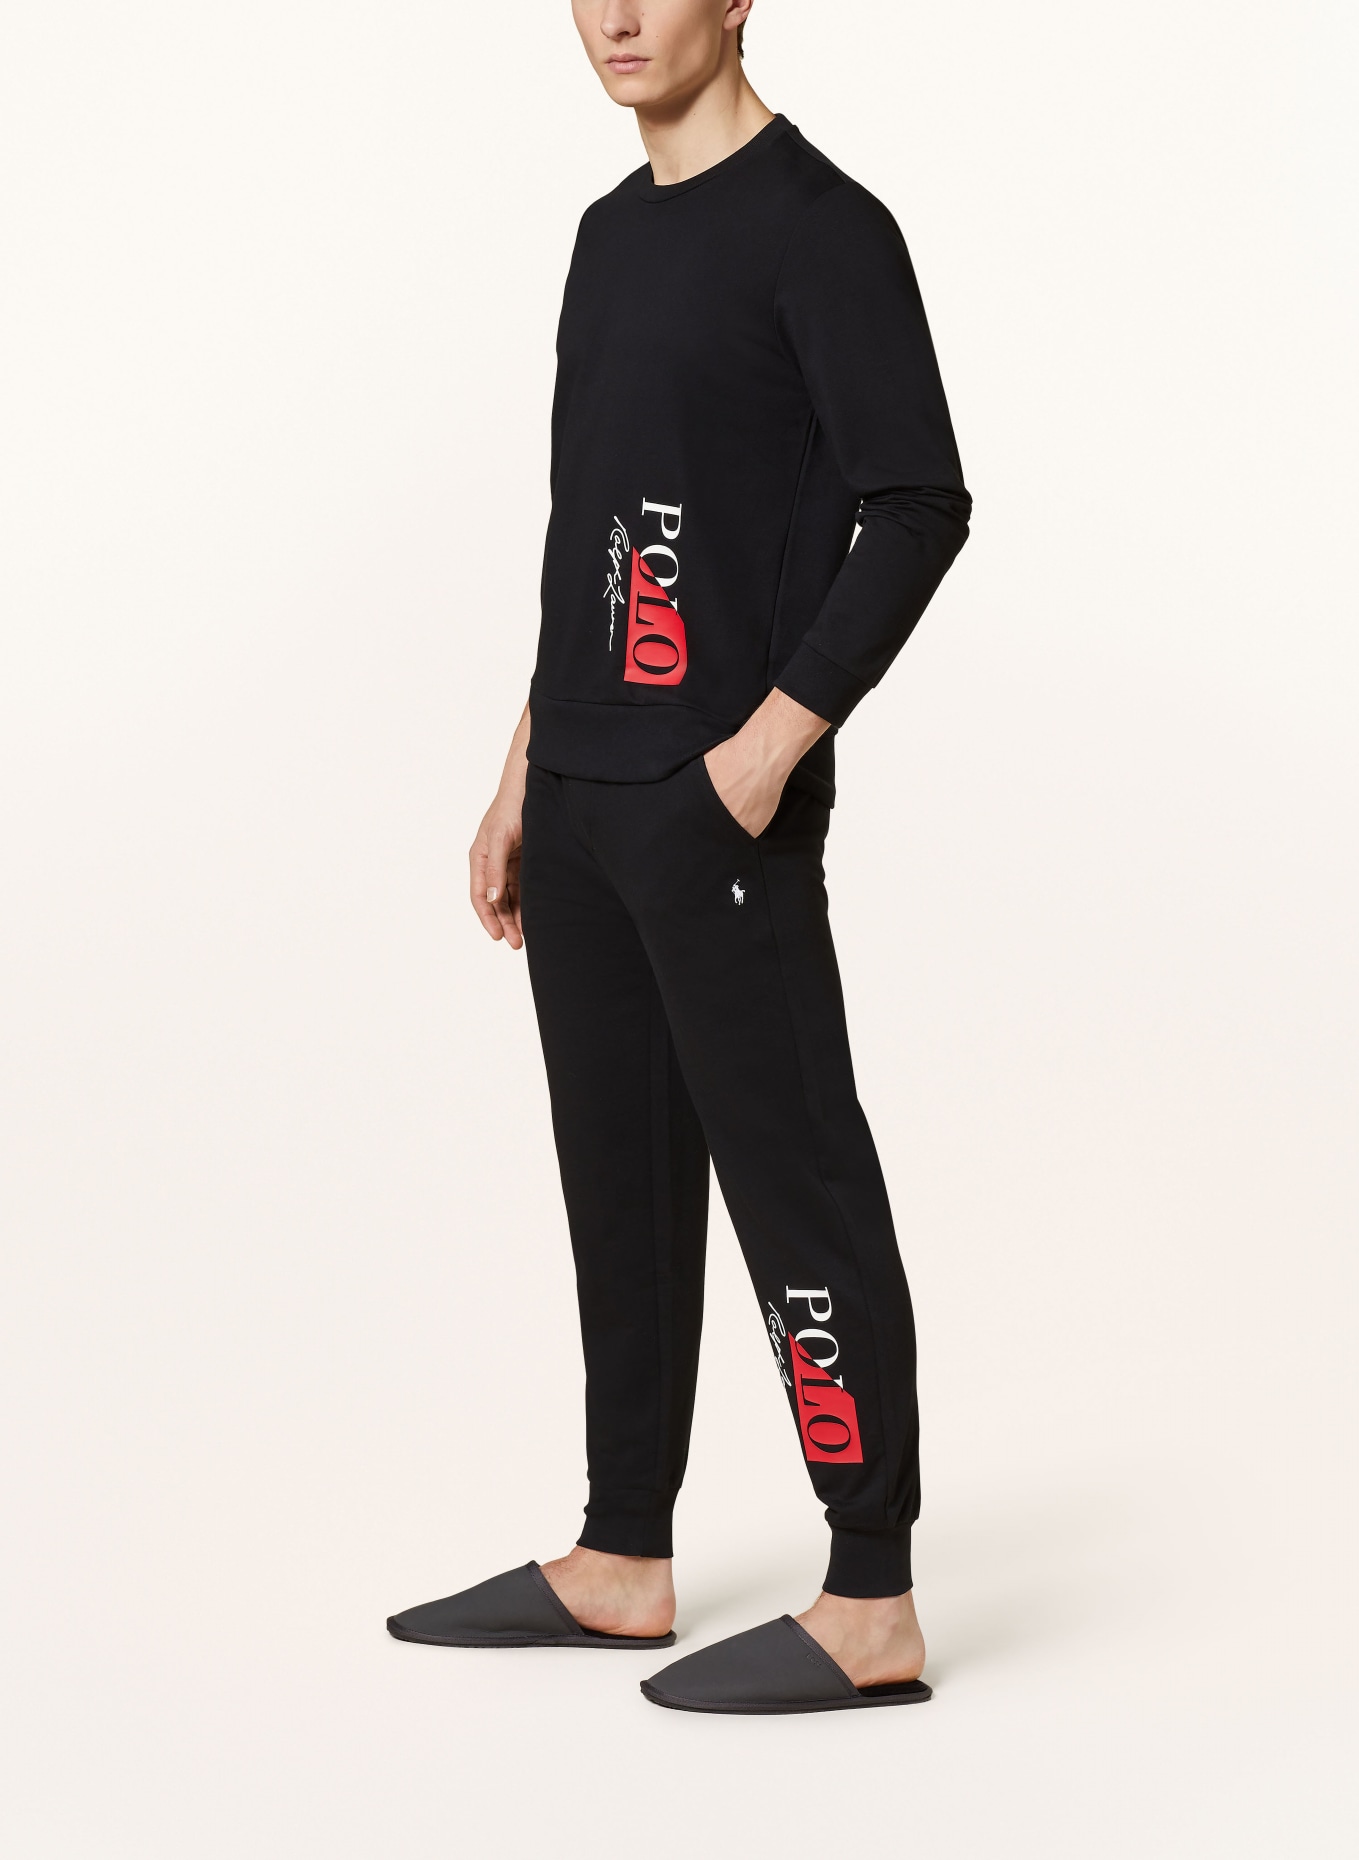 POLO RALPH LAUREN Lounge pants in black/ red/ white